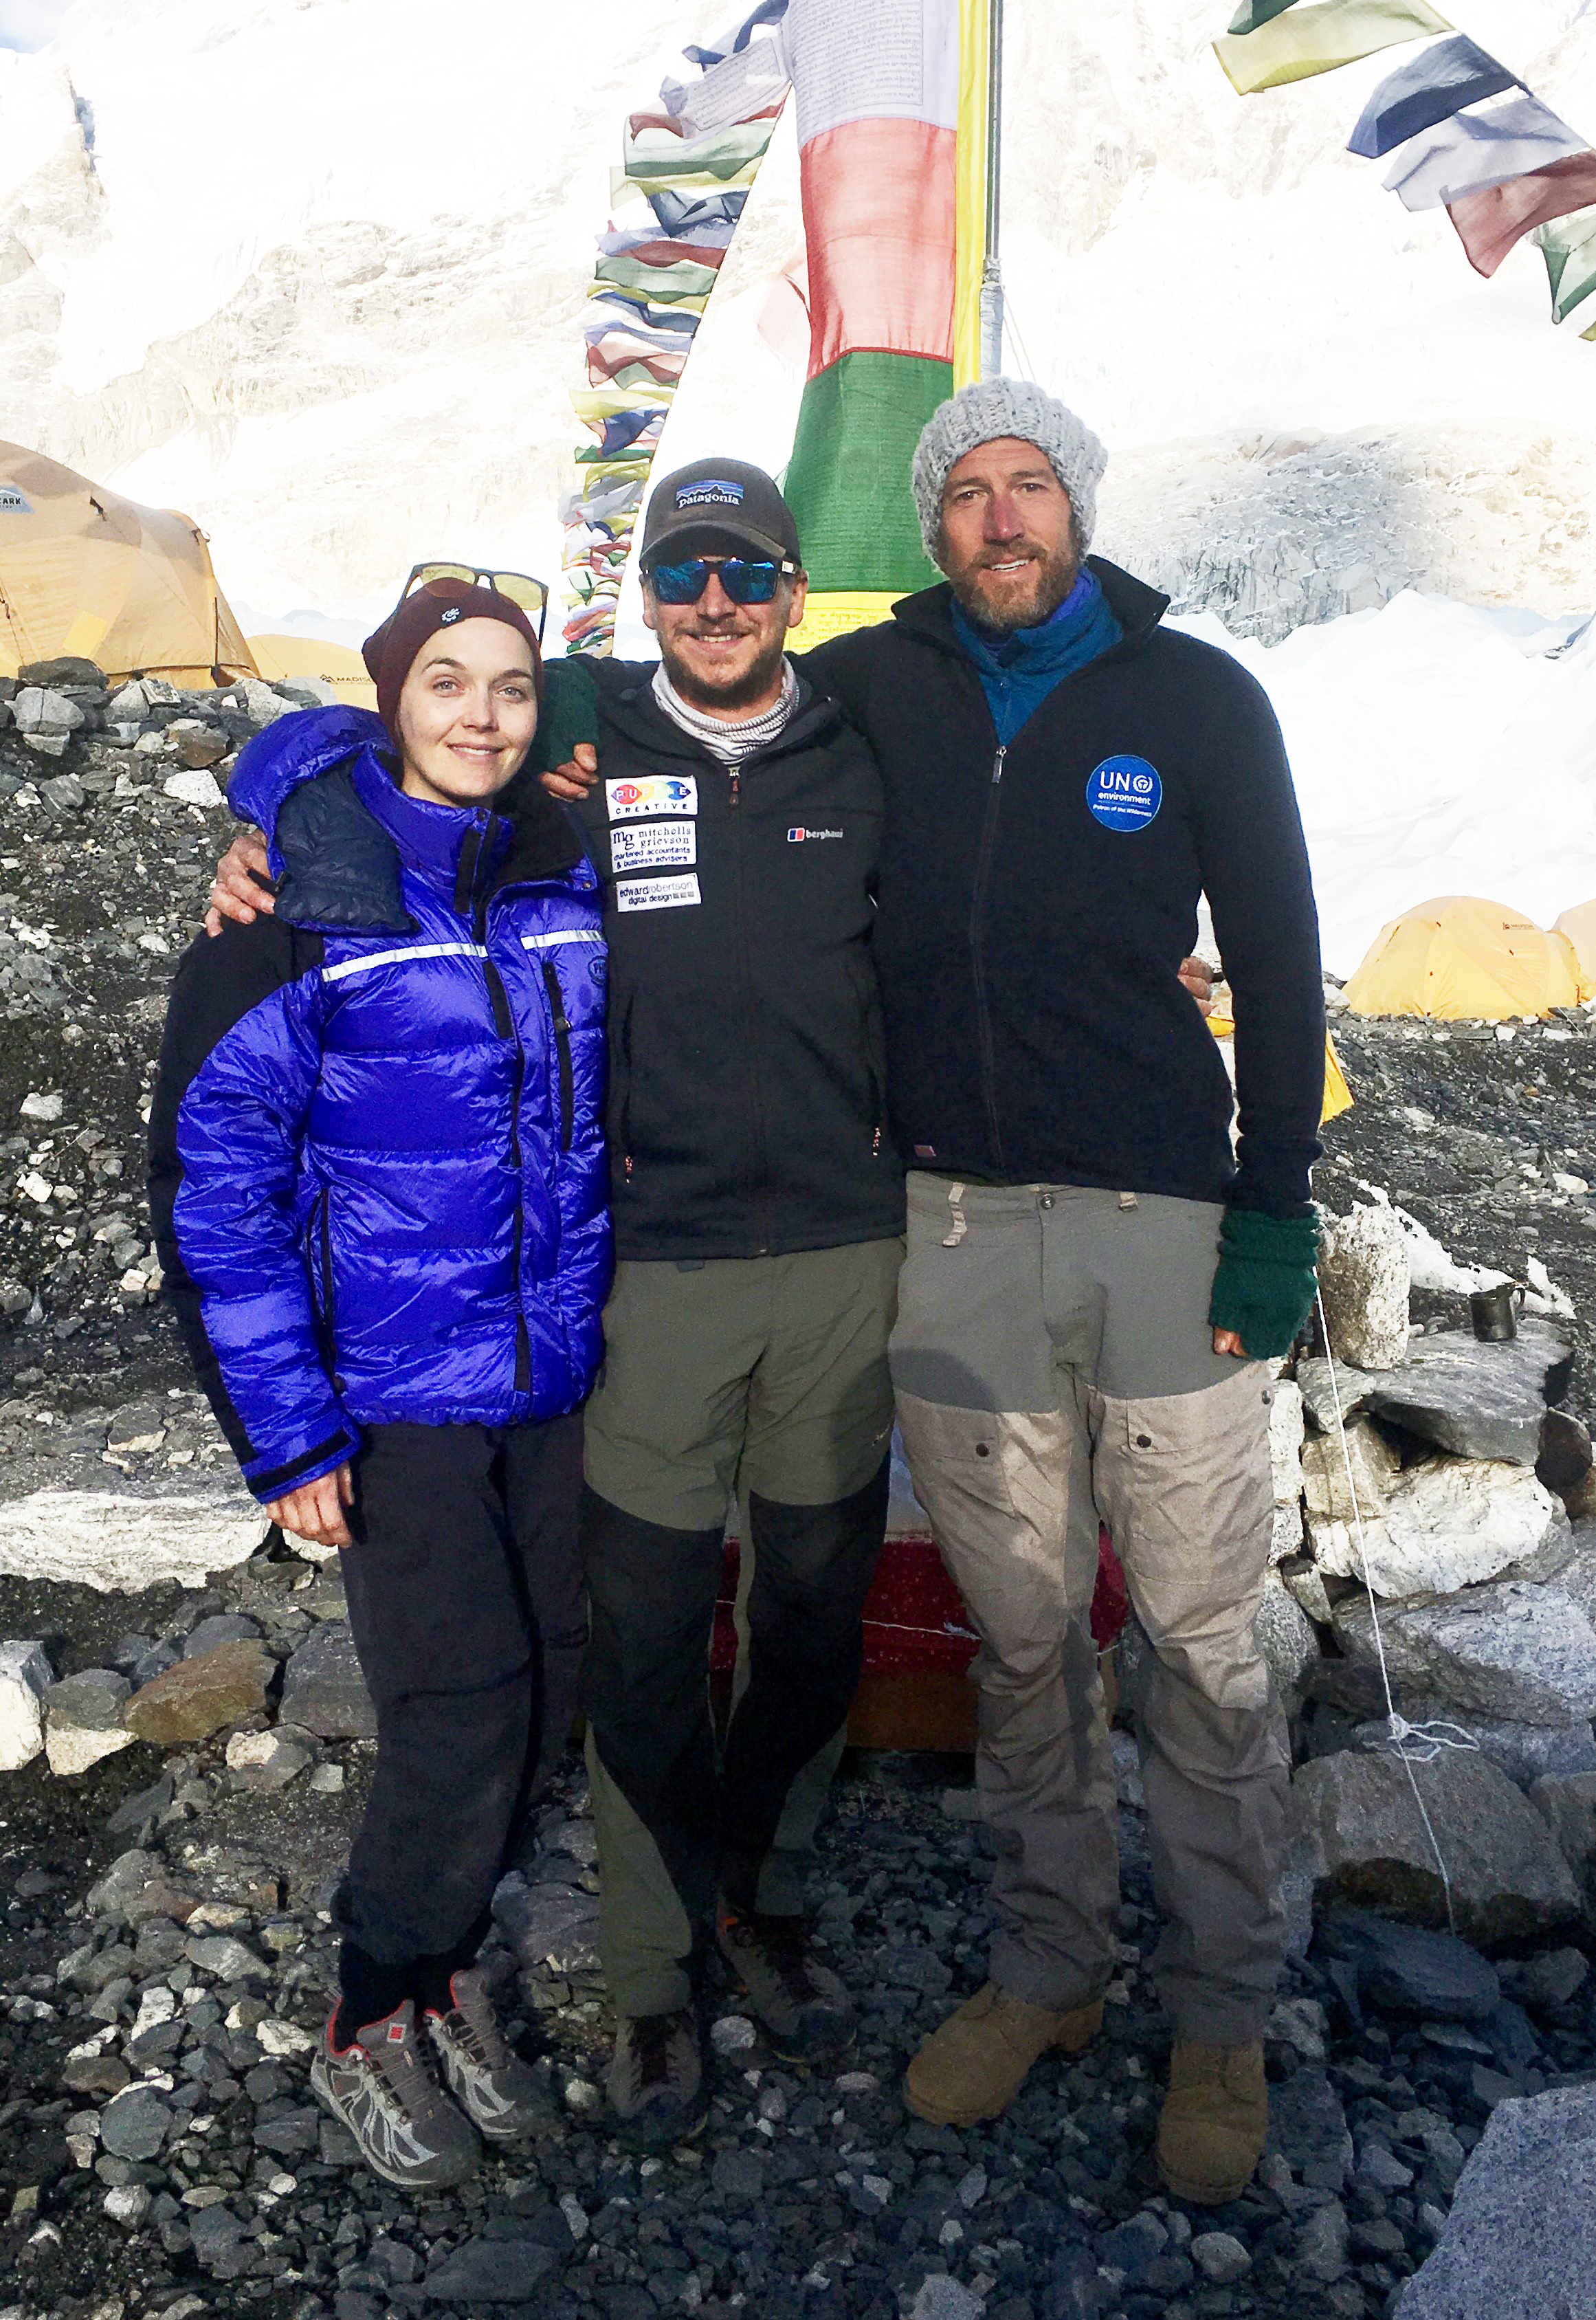 Everest with Victoria Pendleton and Ben Fogle